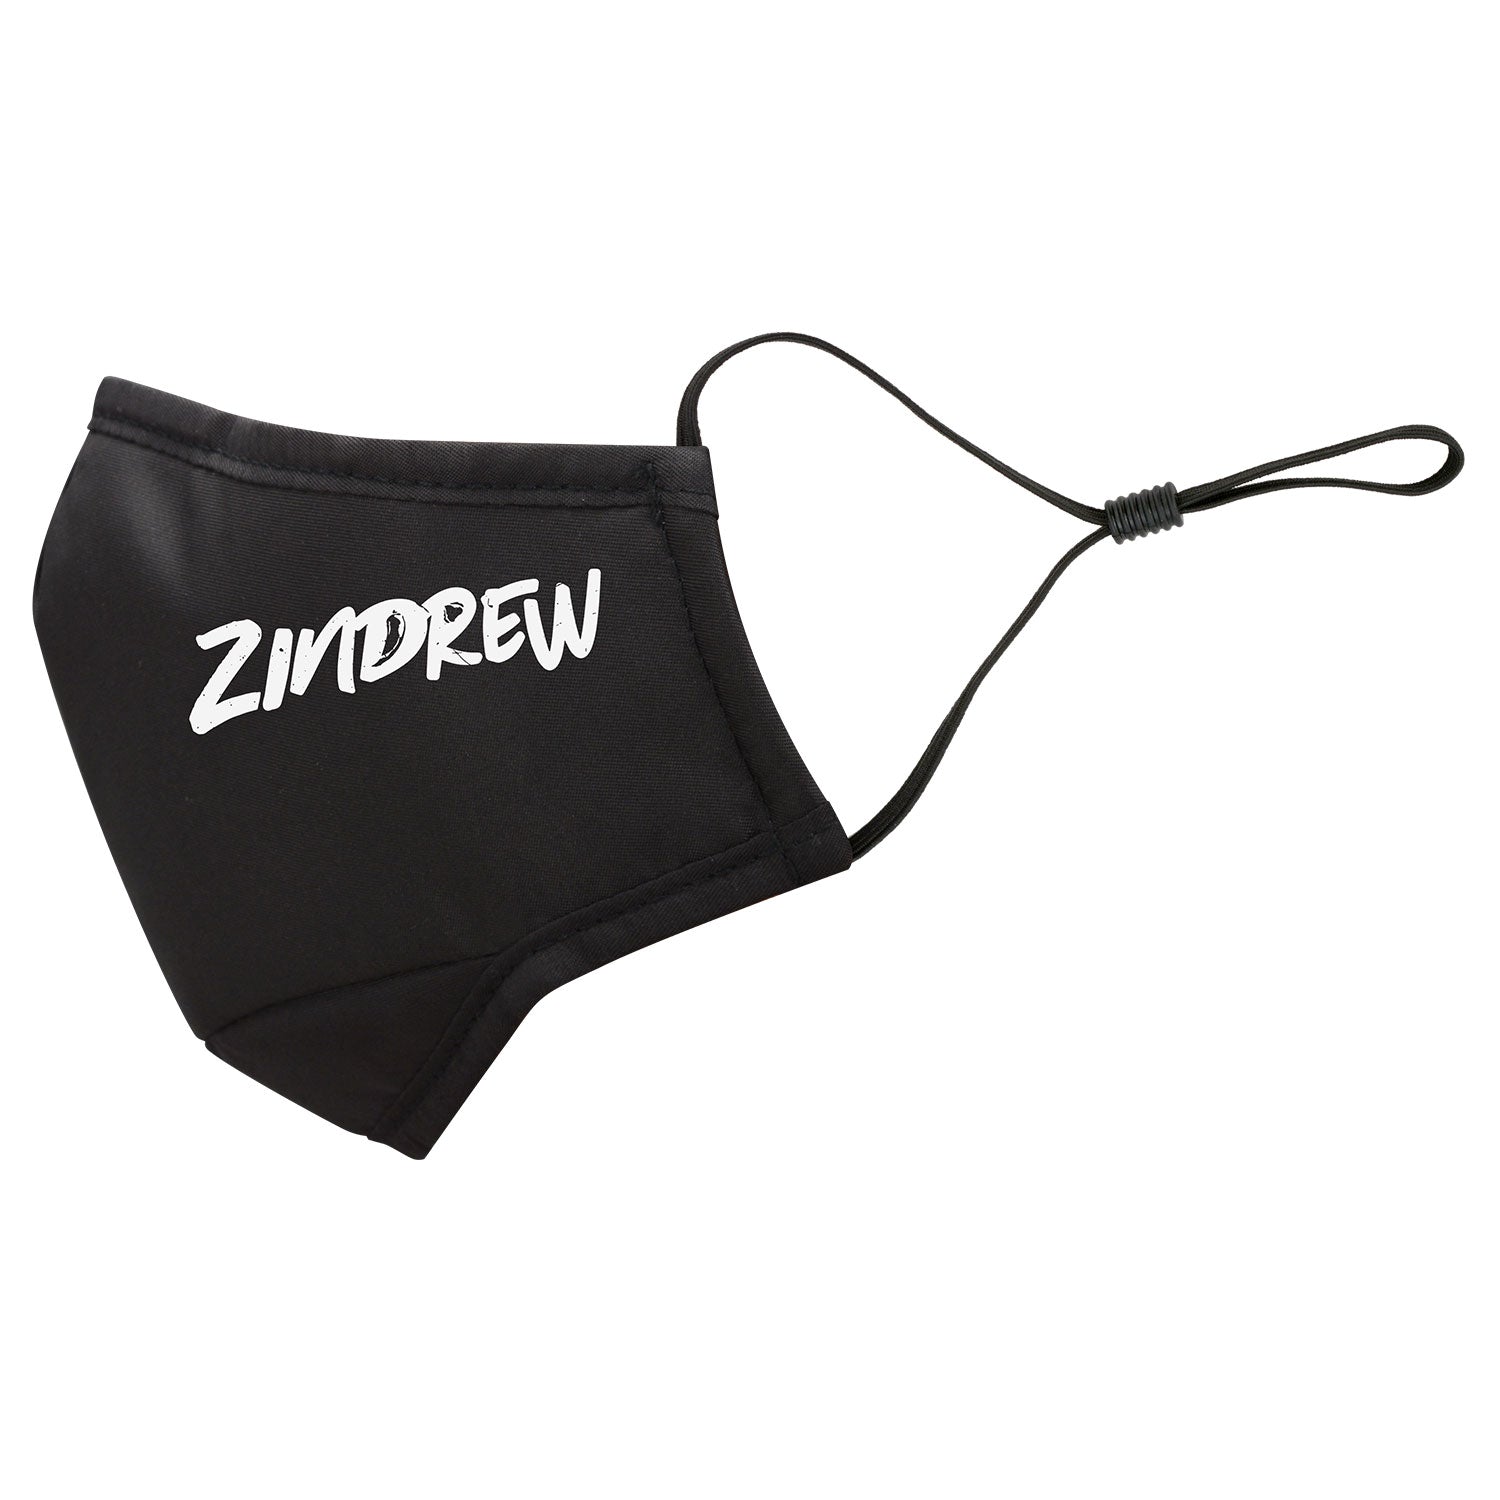 Zindrew Face Mask w/ Filter